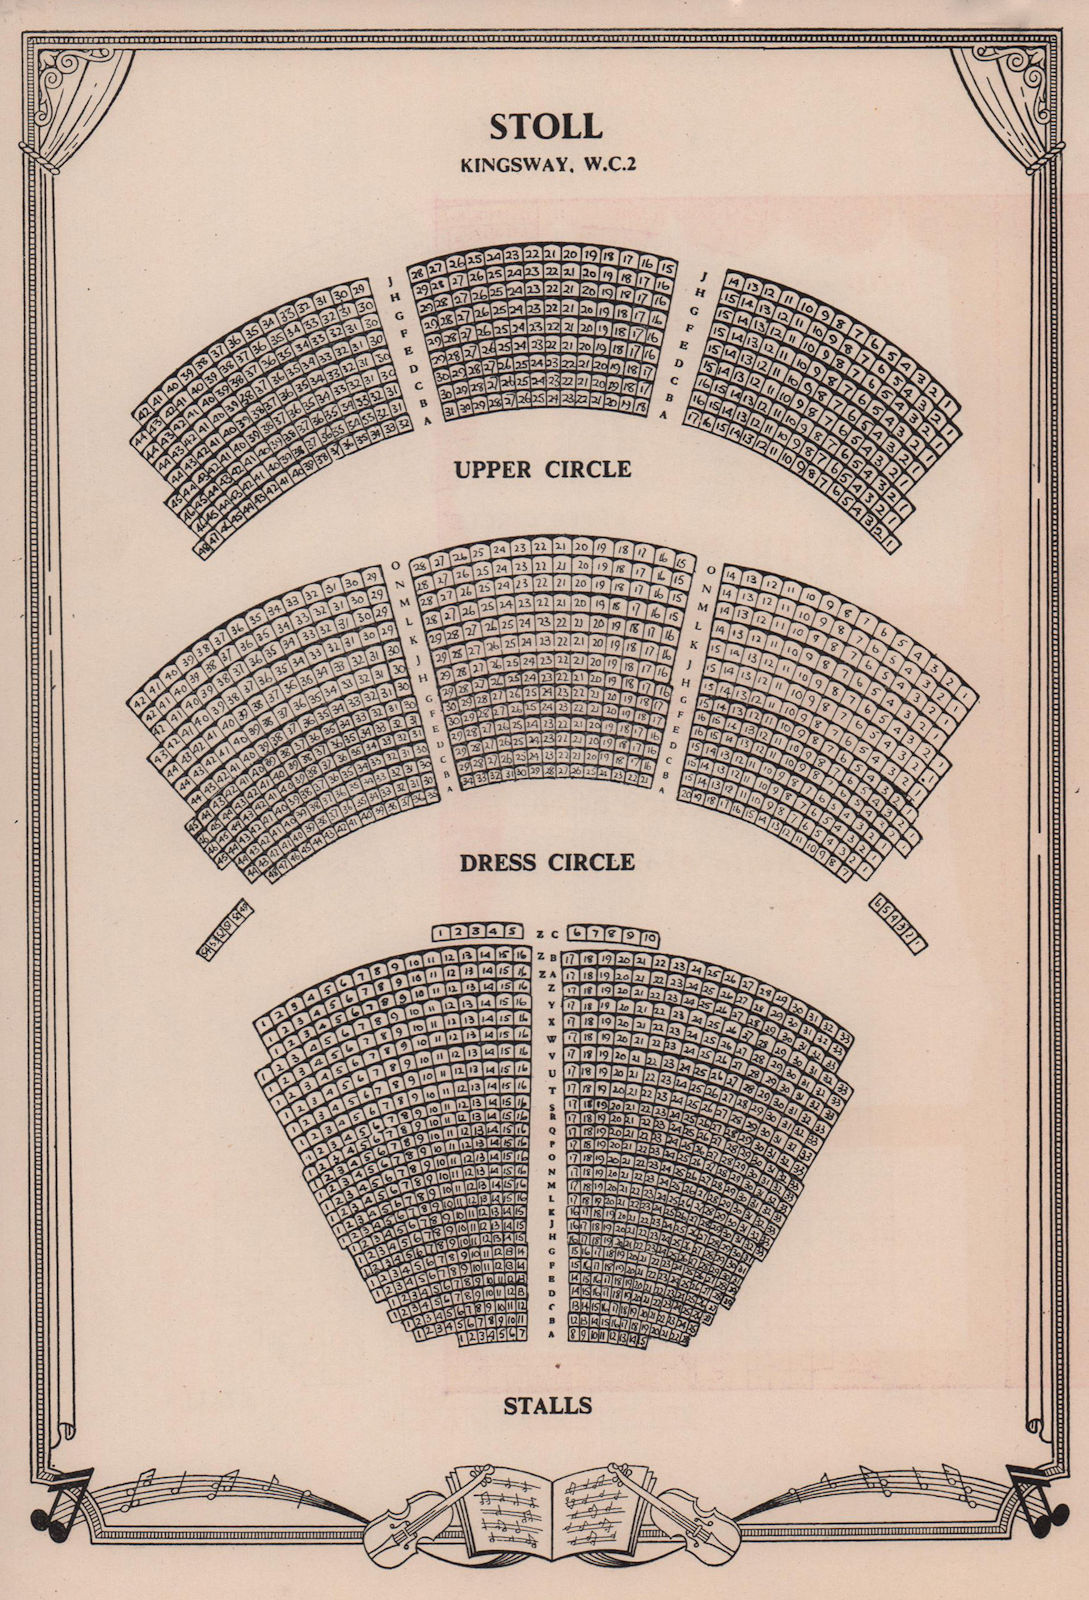 Associate Product Stoll (now Peacock) Theatre, Kingsway, London. Vintage seating plan 1955 print